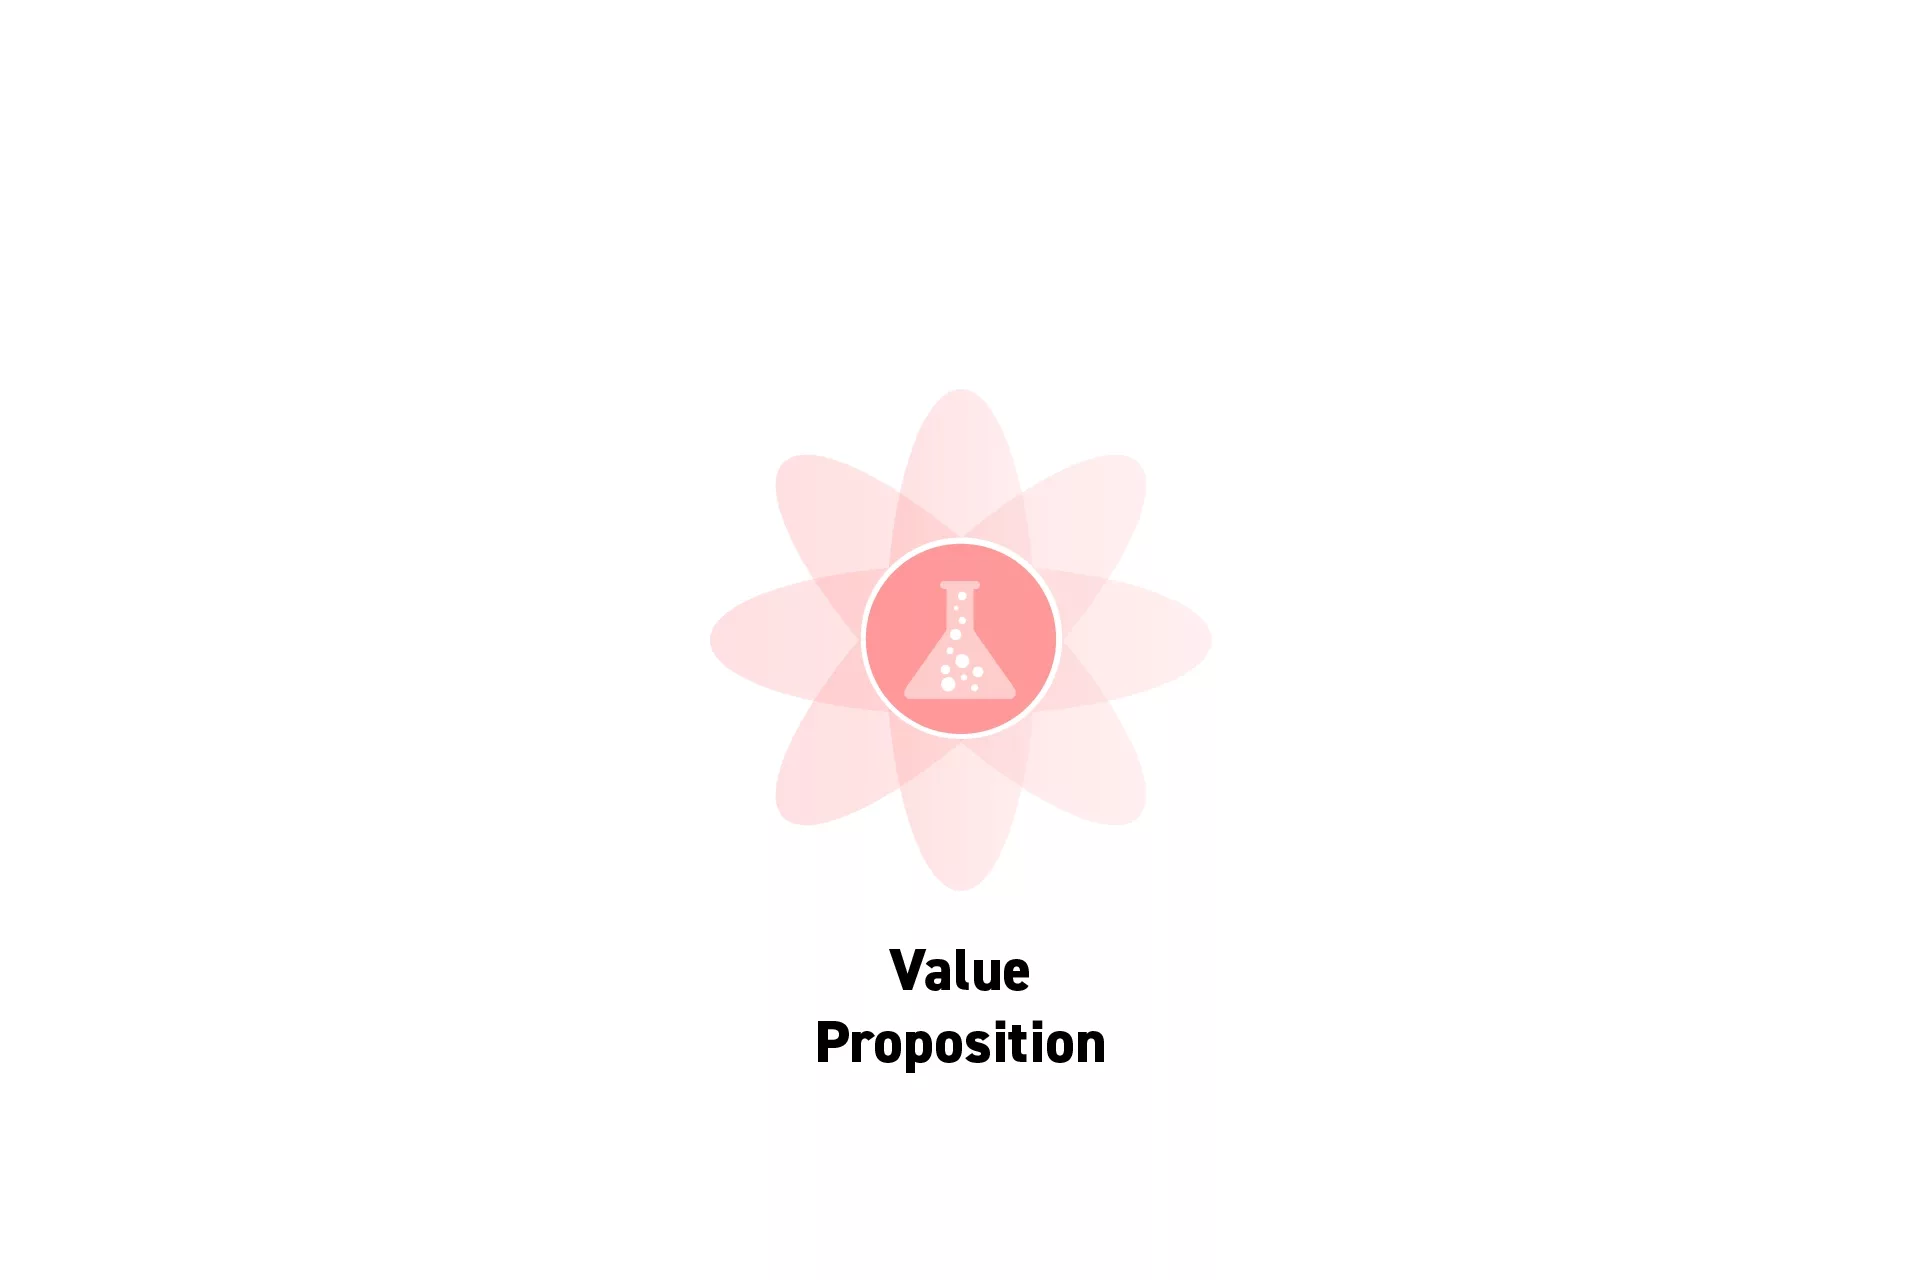 A flower that represents Strategy with the text “Value Proposition” beneath it.